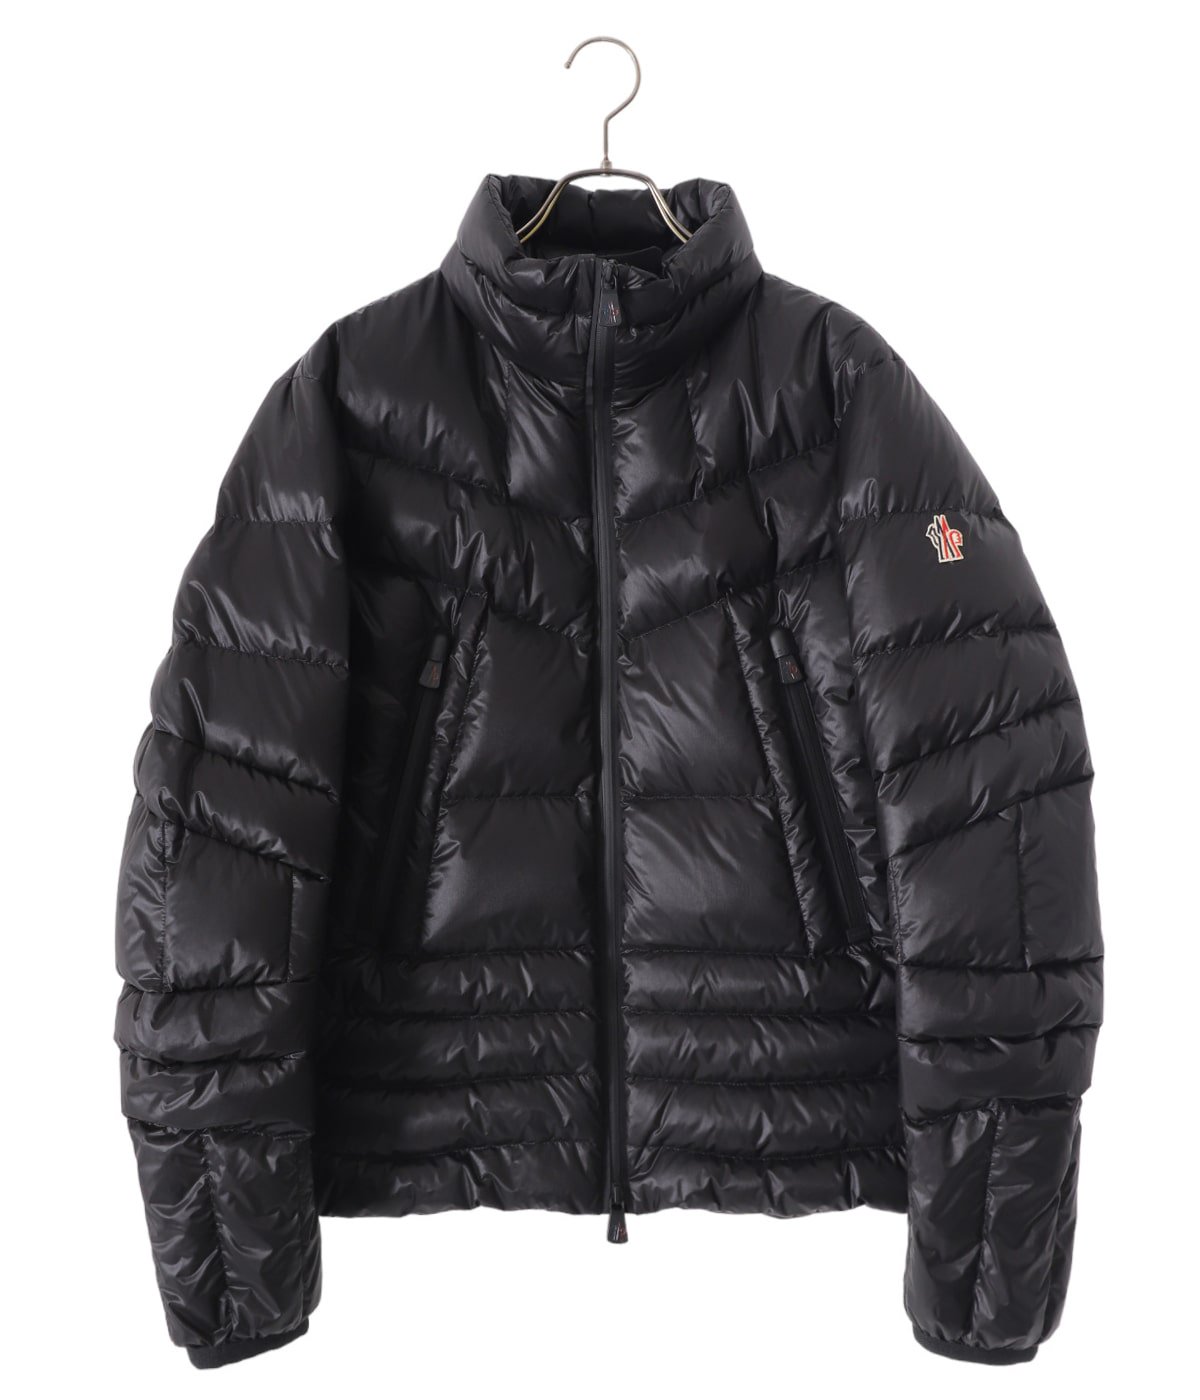 CANMORE JACKET | MONCLER(モンクレール) / アウター ダウン・中綿 